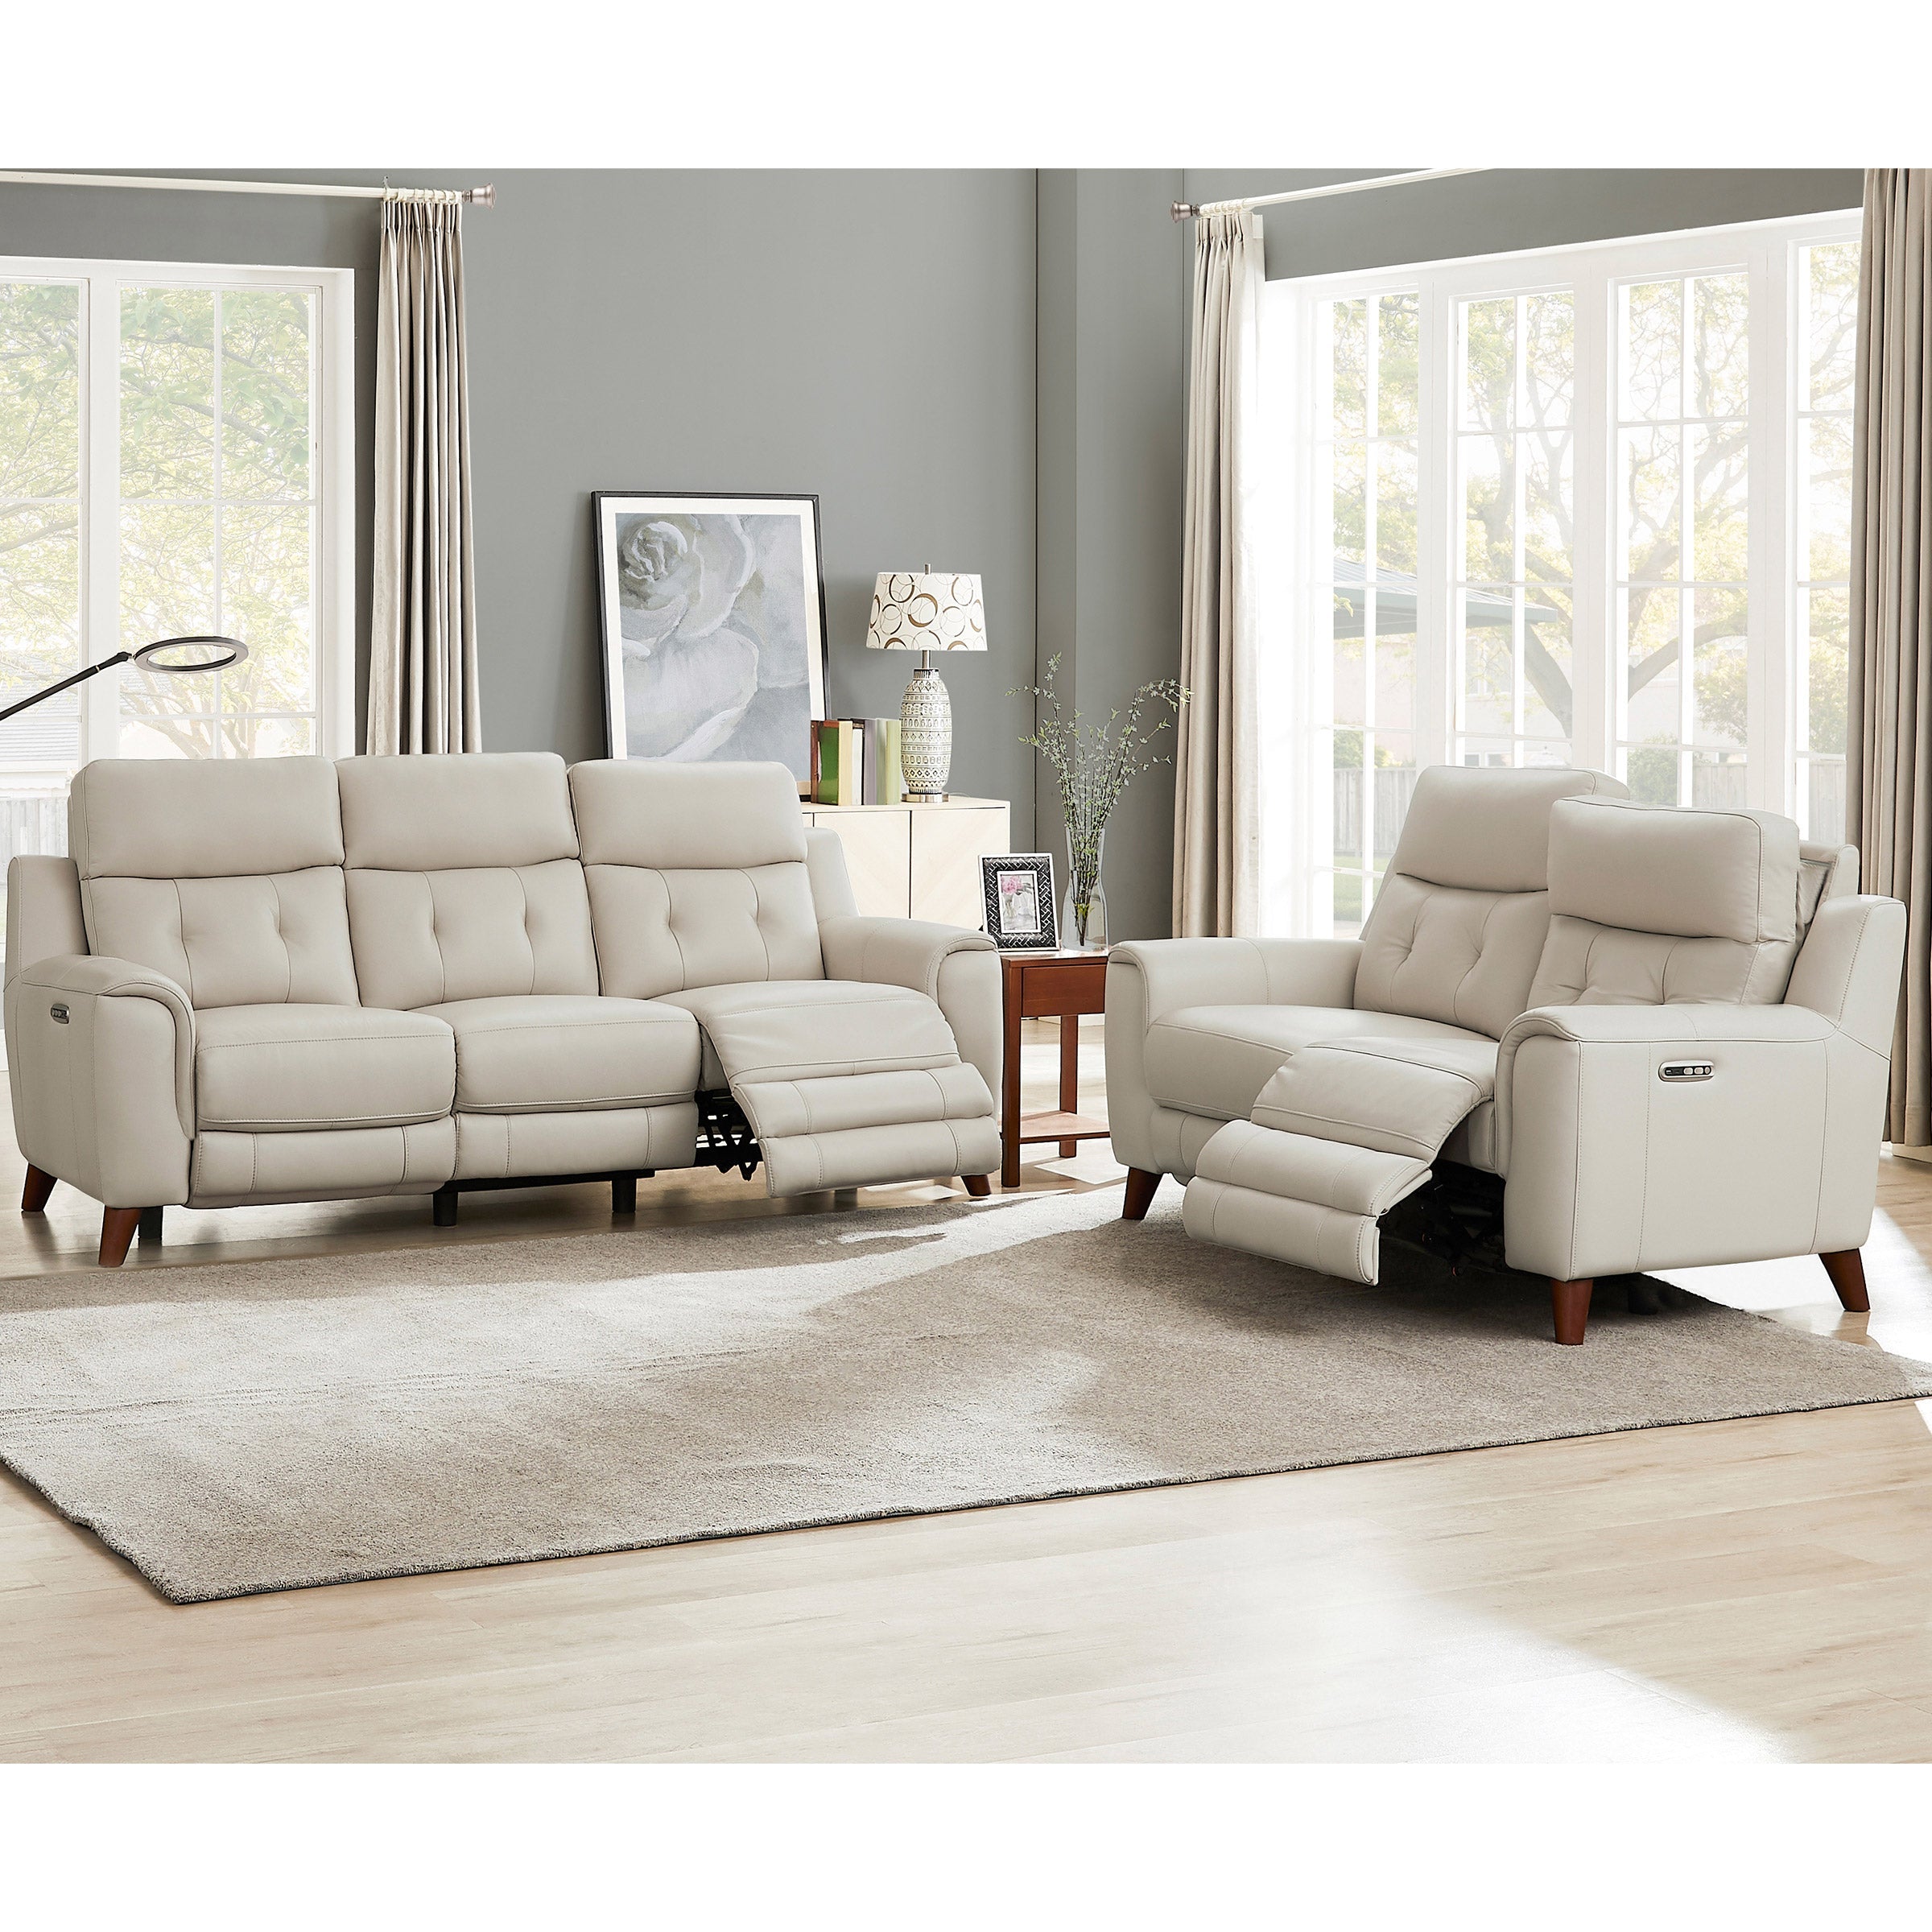 Malibu 2-piece Leather Power Reclining Set with Power Headrests – Sofa and Loveseat Image